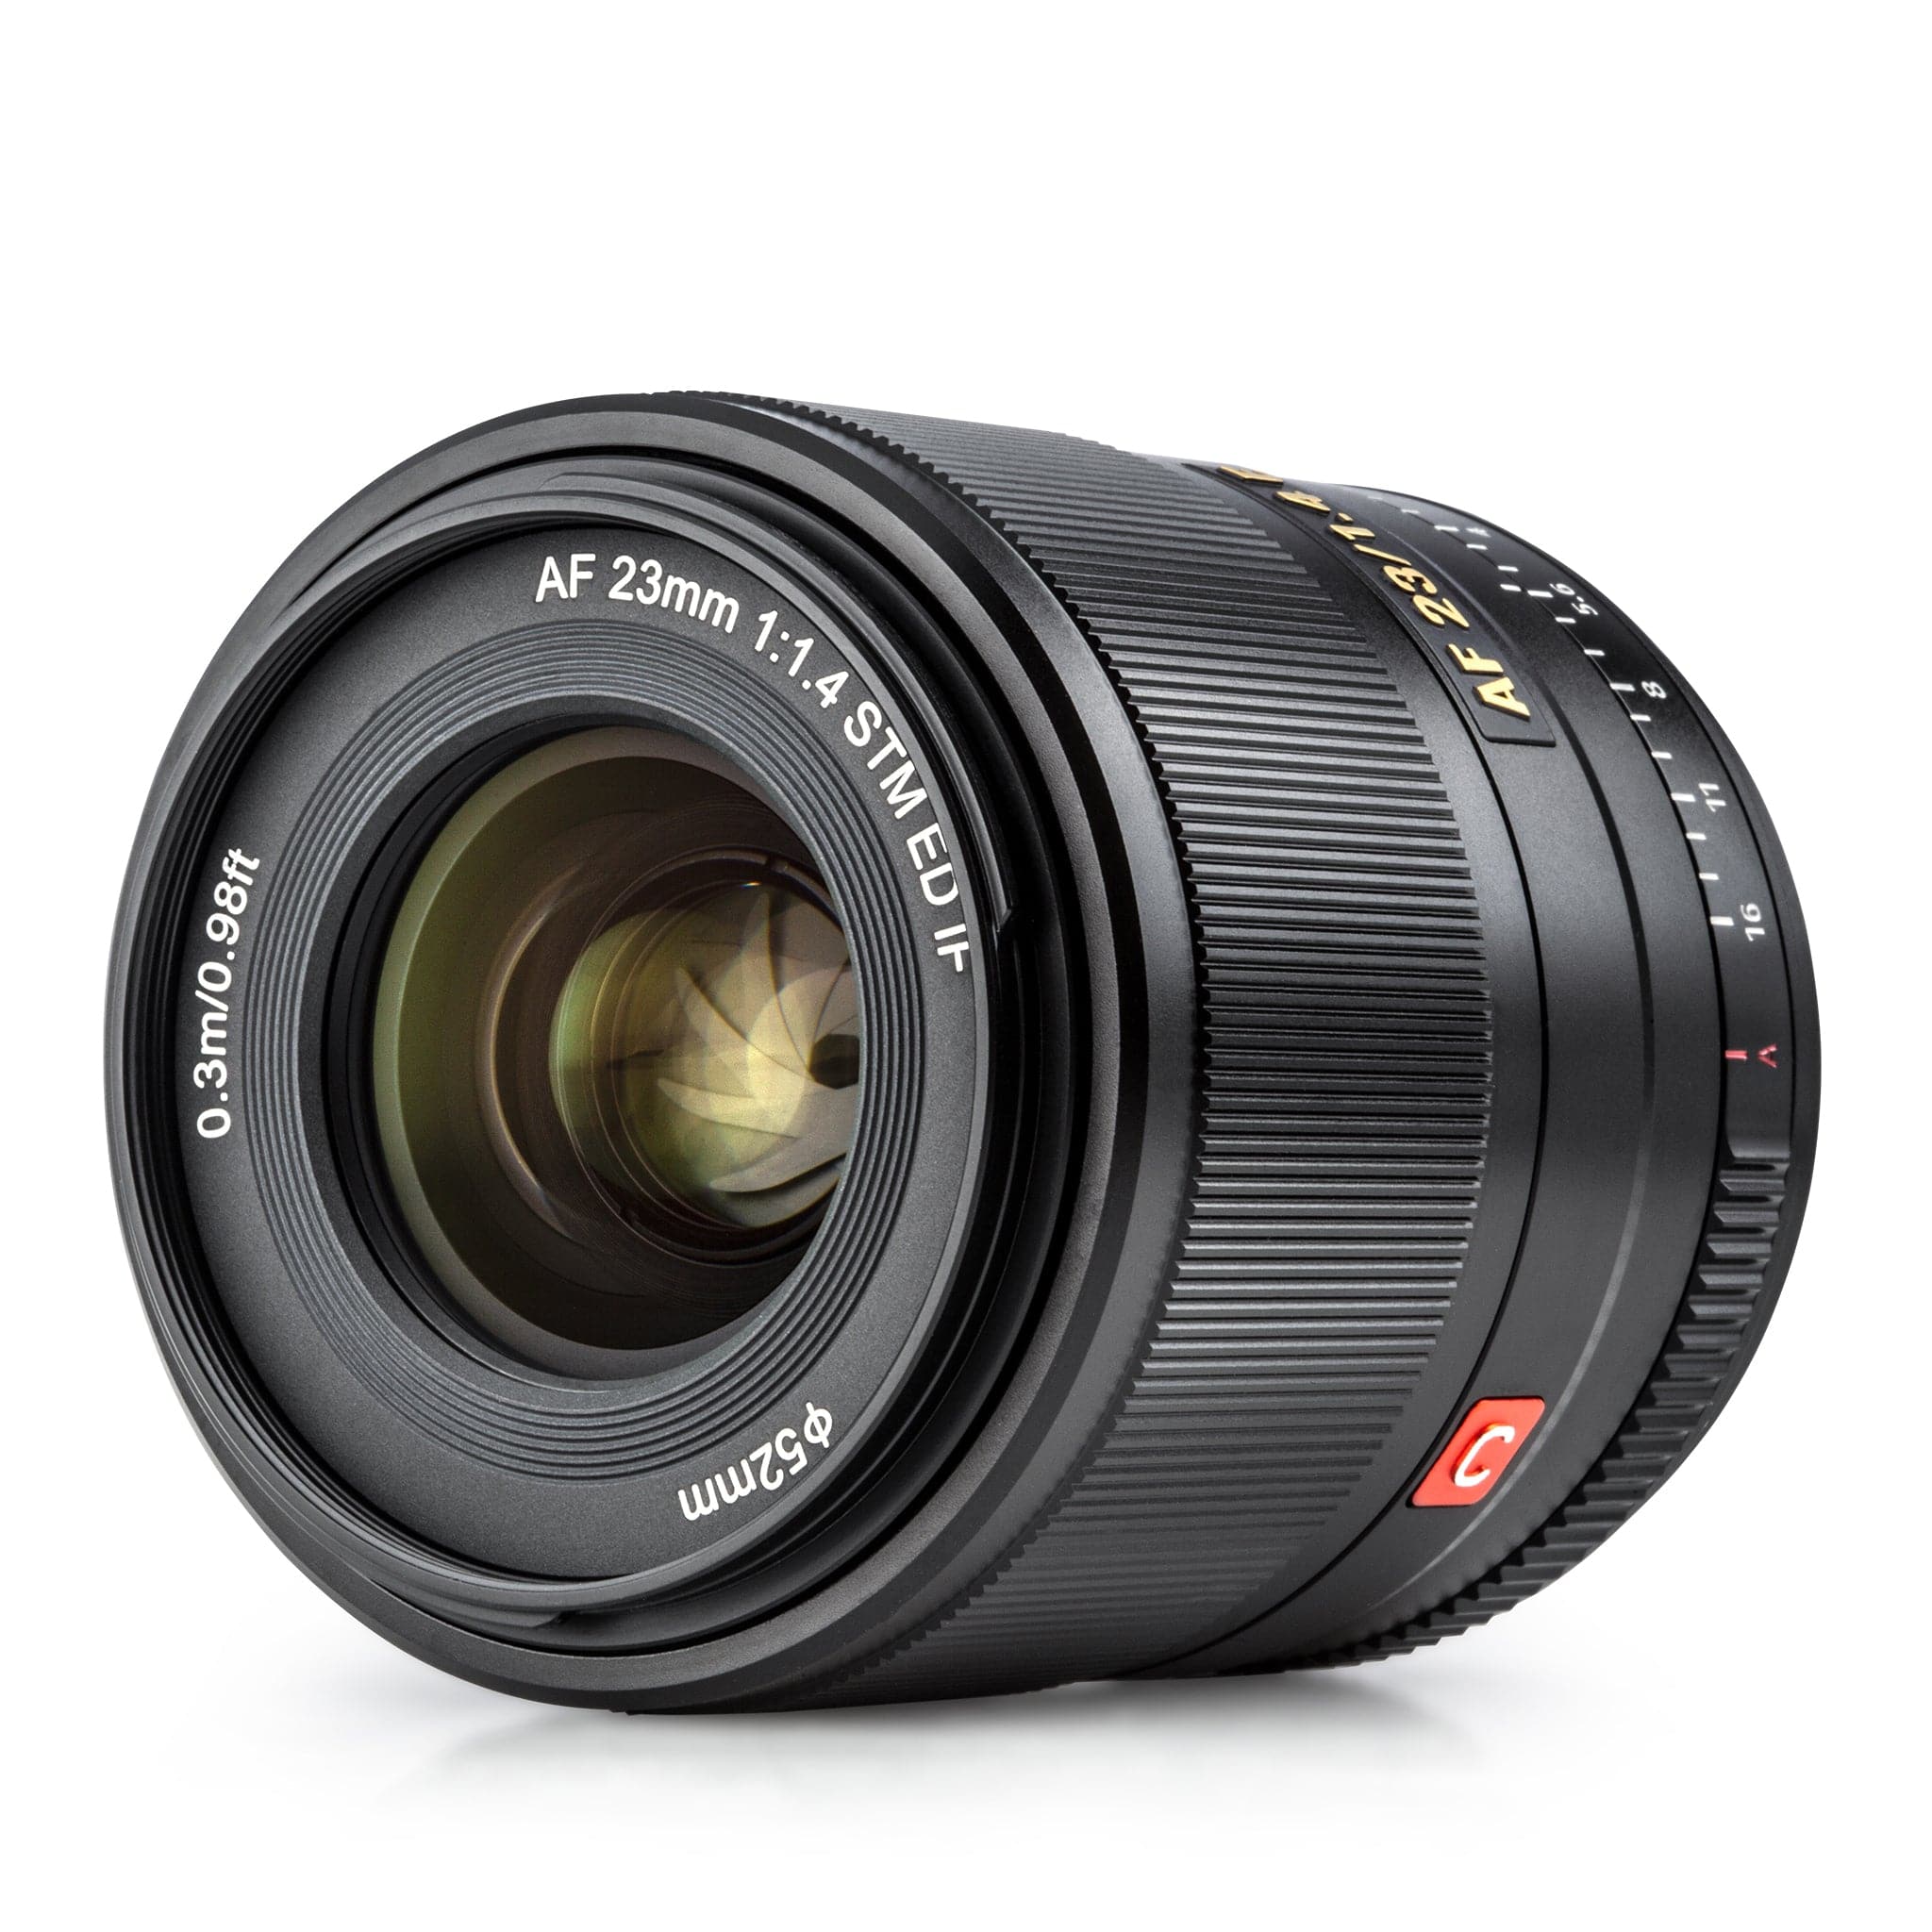 NEW Viltrox 23mm f1.4 E Auto Focus APS-C Prime Lens for Sony E-mount Camera  with Large Aperture